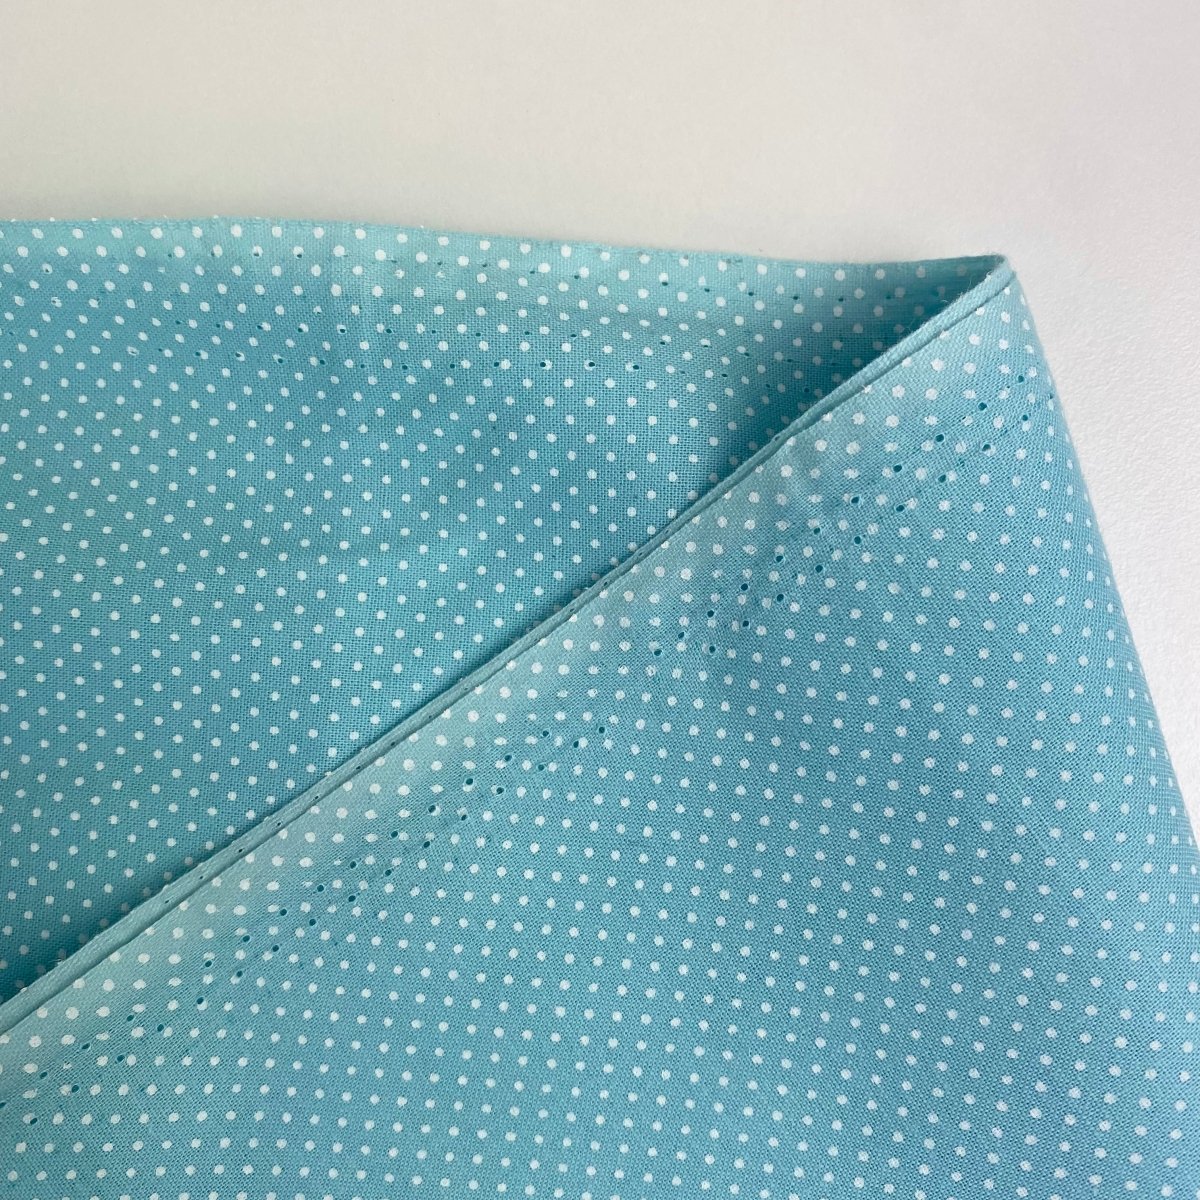 Sew Easy - Micro Dots - Light Blue - Sewing Gem